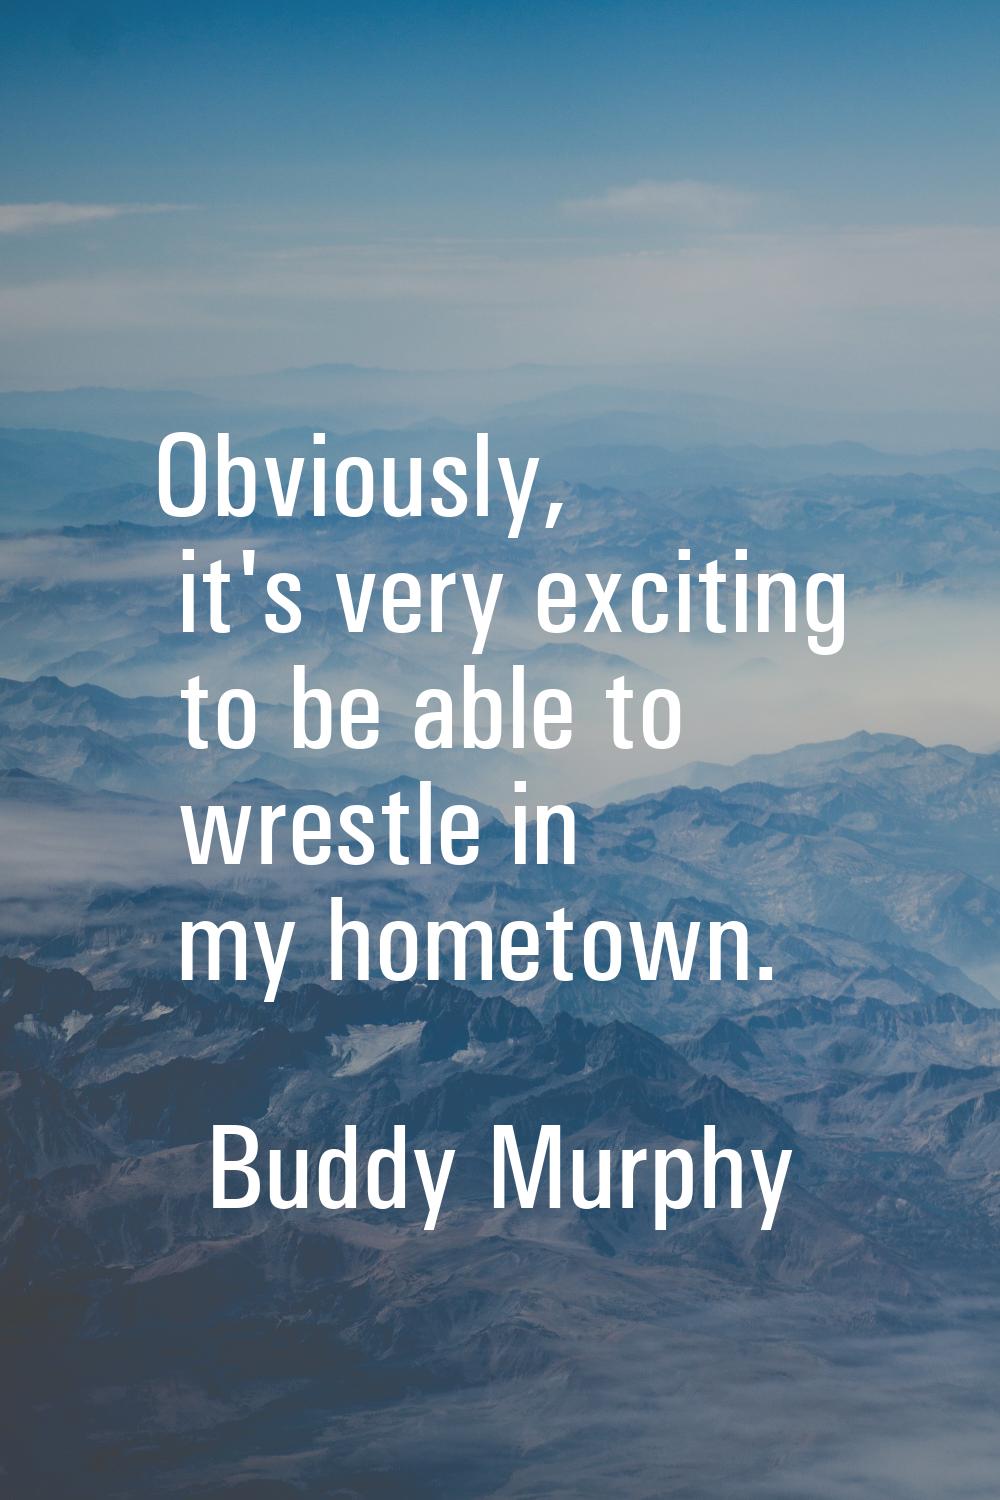 Obviously, it's very exciting to be able to wrestle in my hometown.